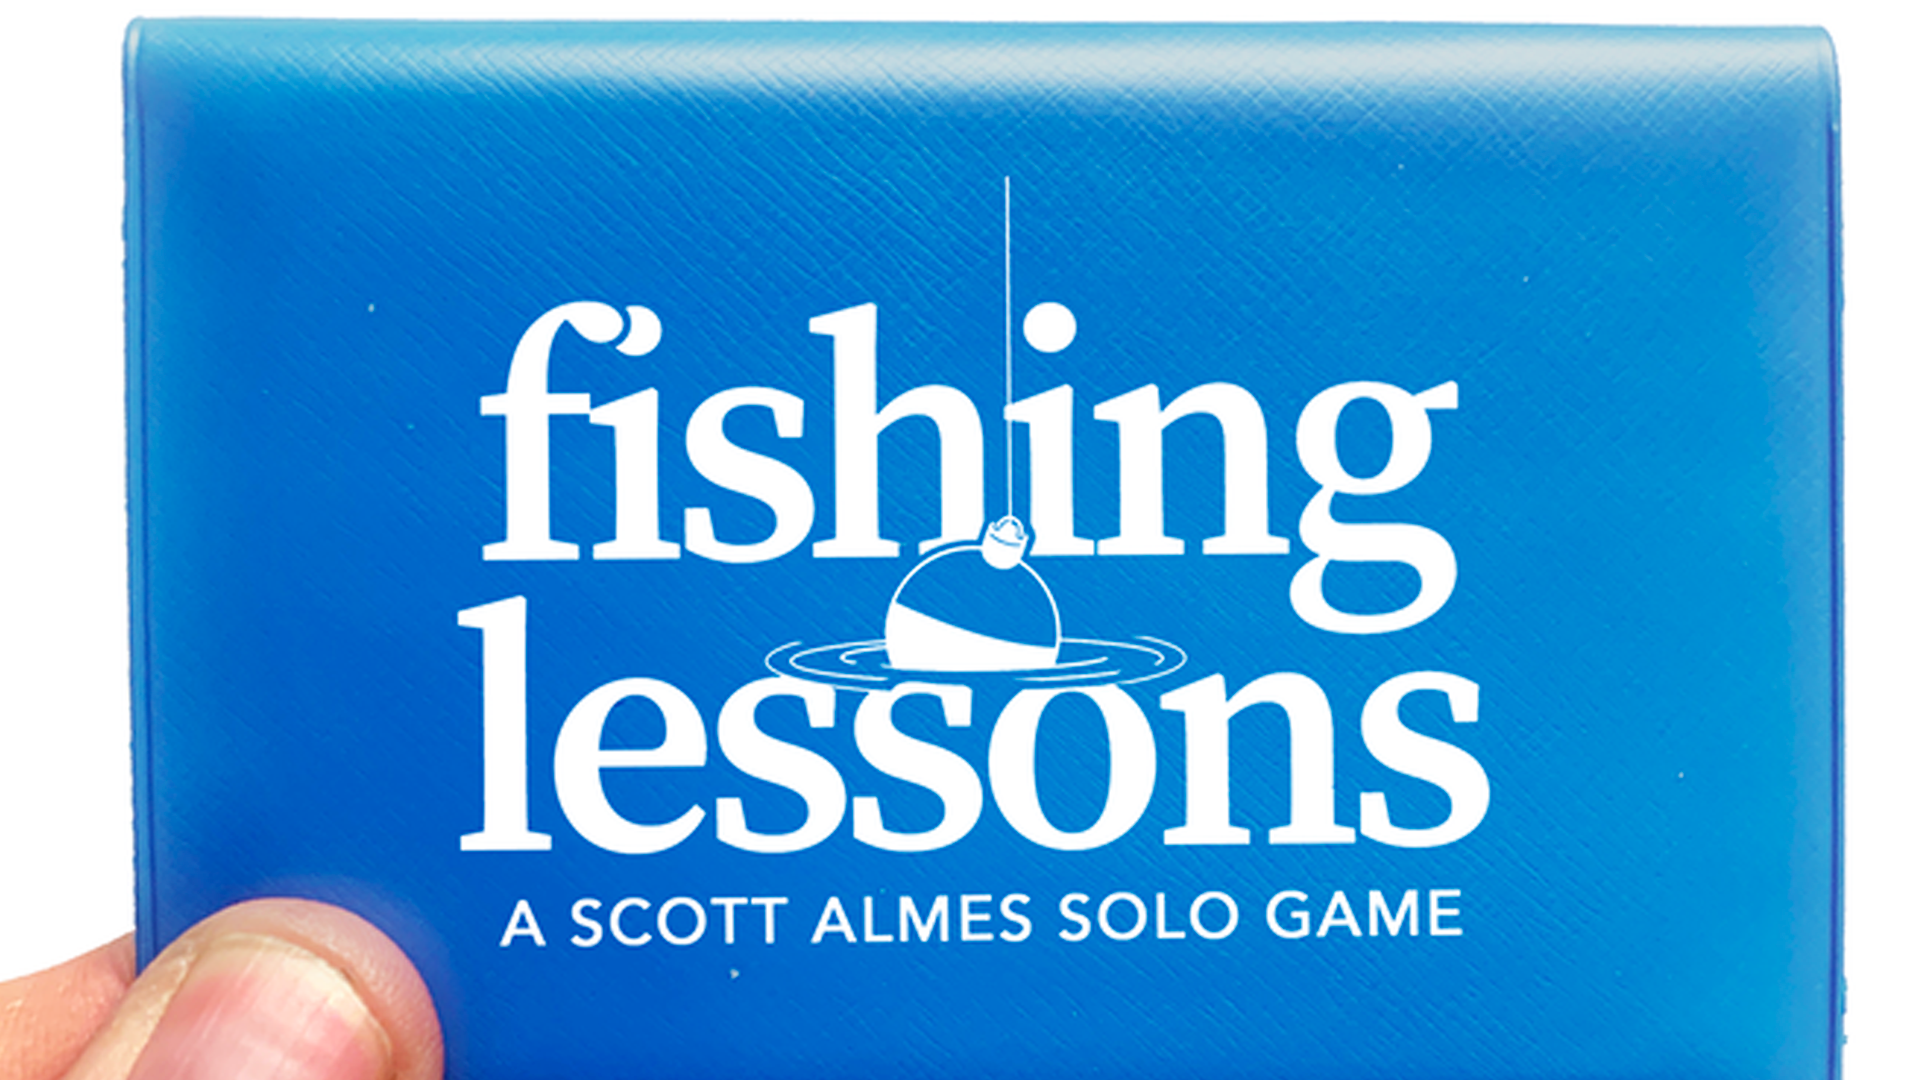 The packaging for Fishing Lessons.